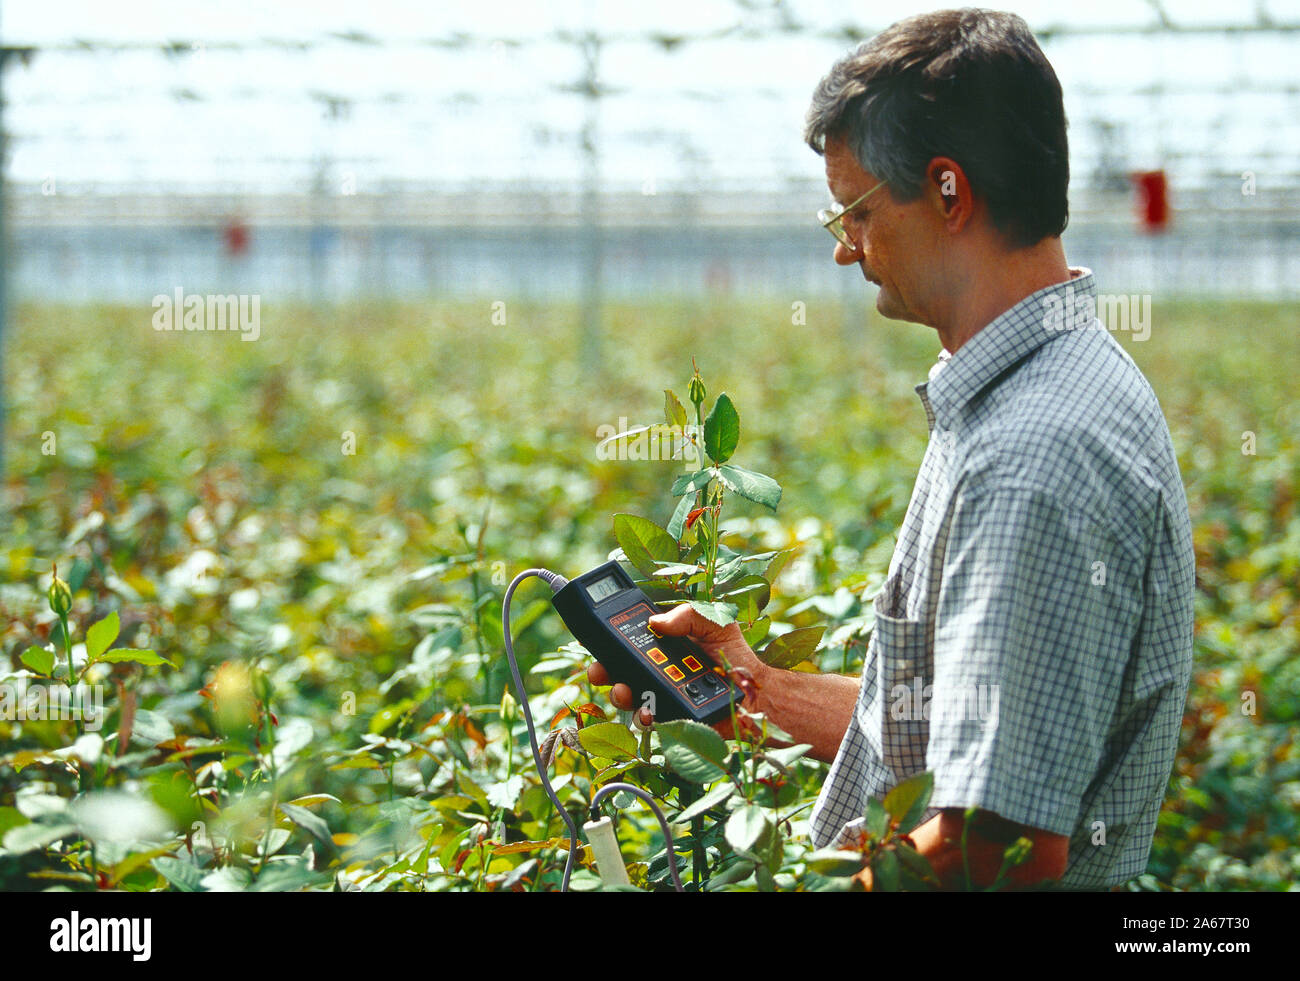 Channel Islands. Guernsey. Man testing conditions inside glasshouse with crop of growing roses. Stock Photo